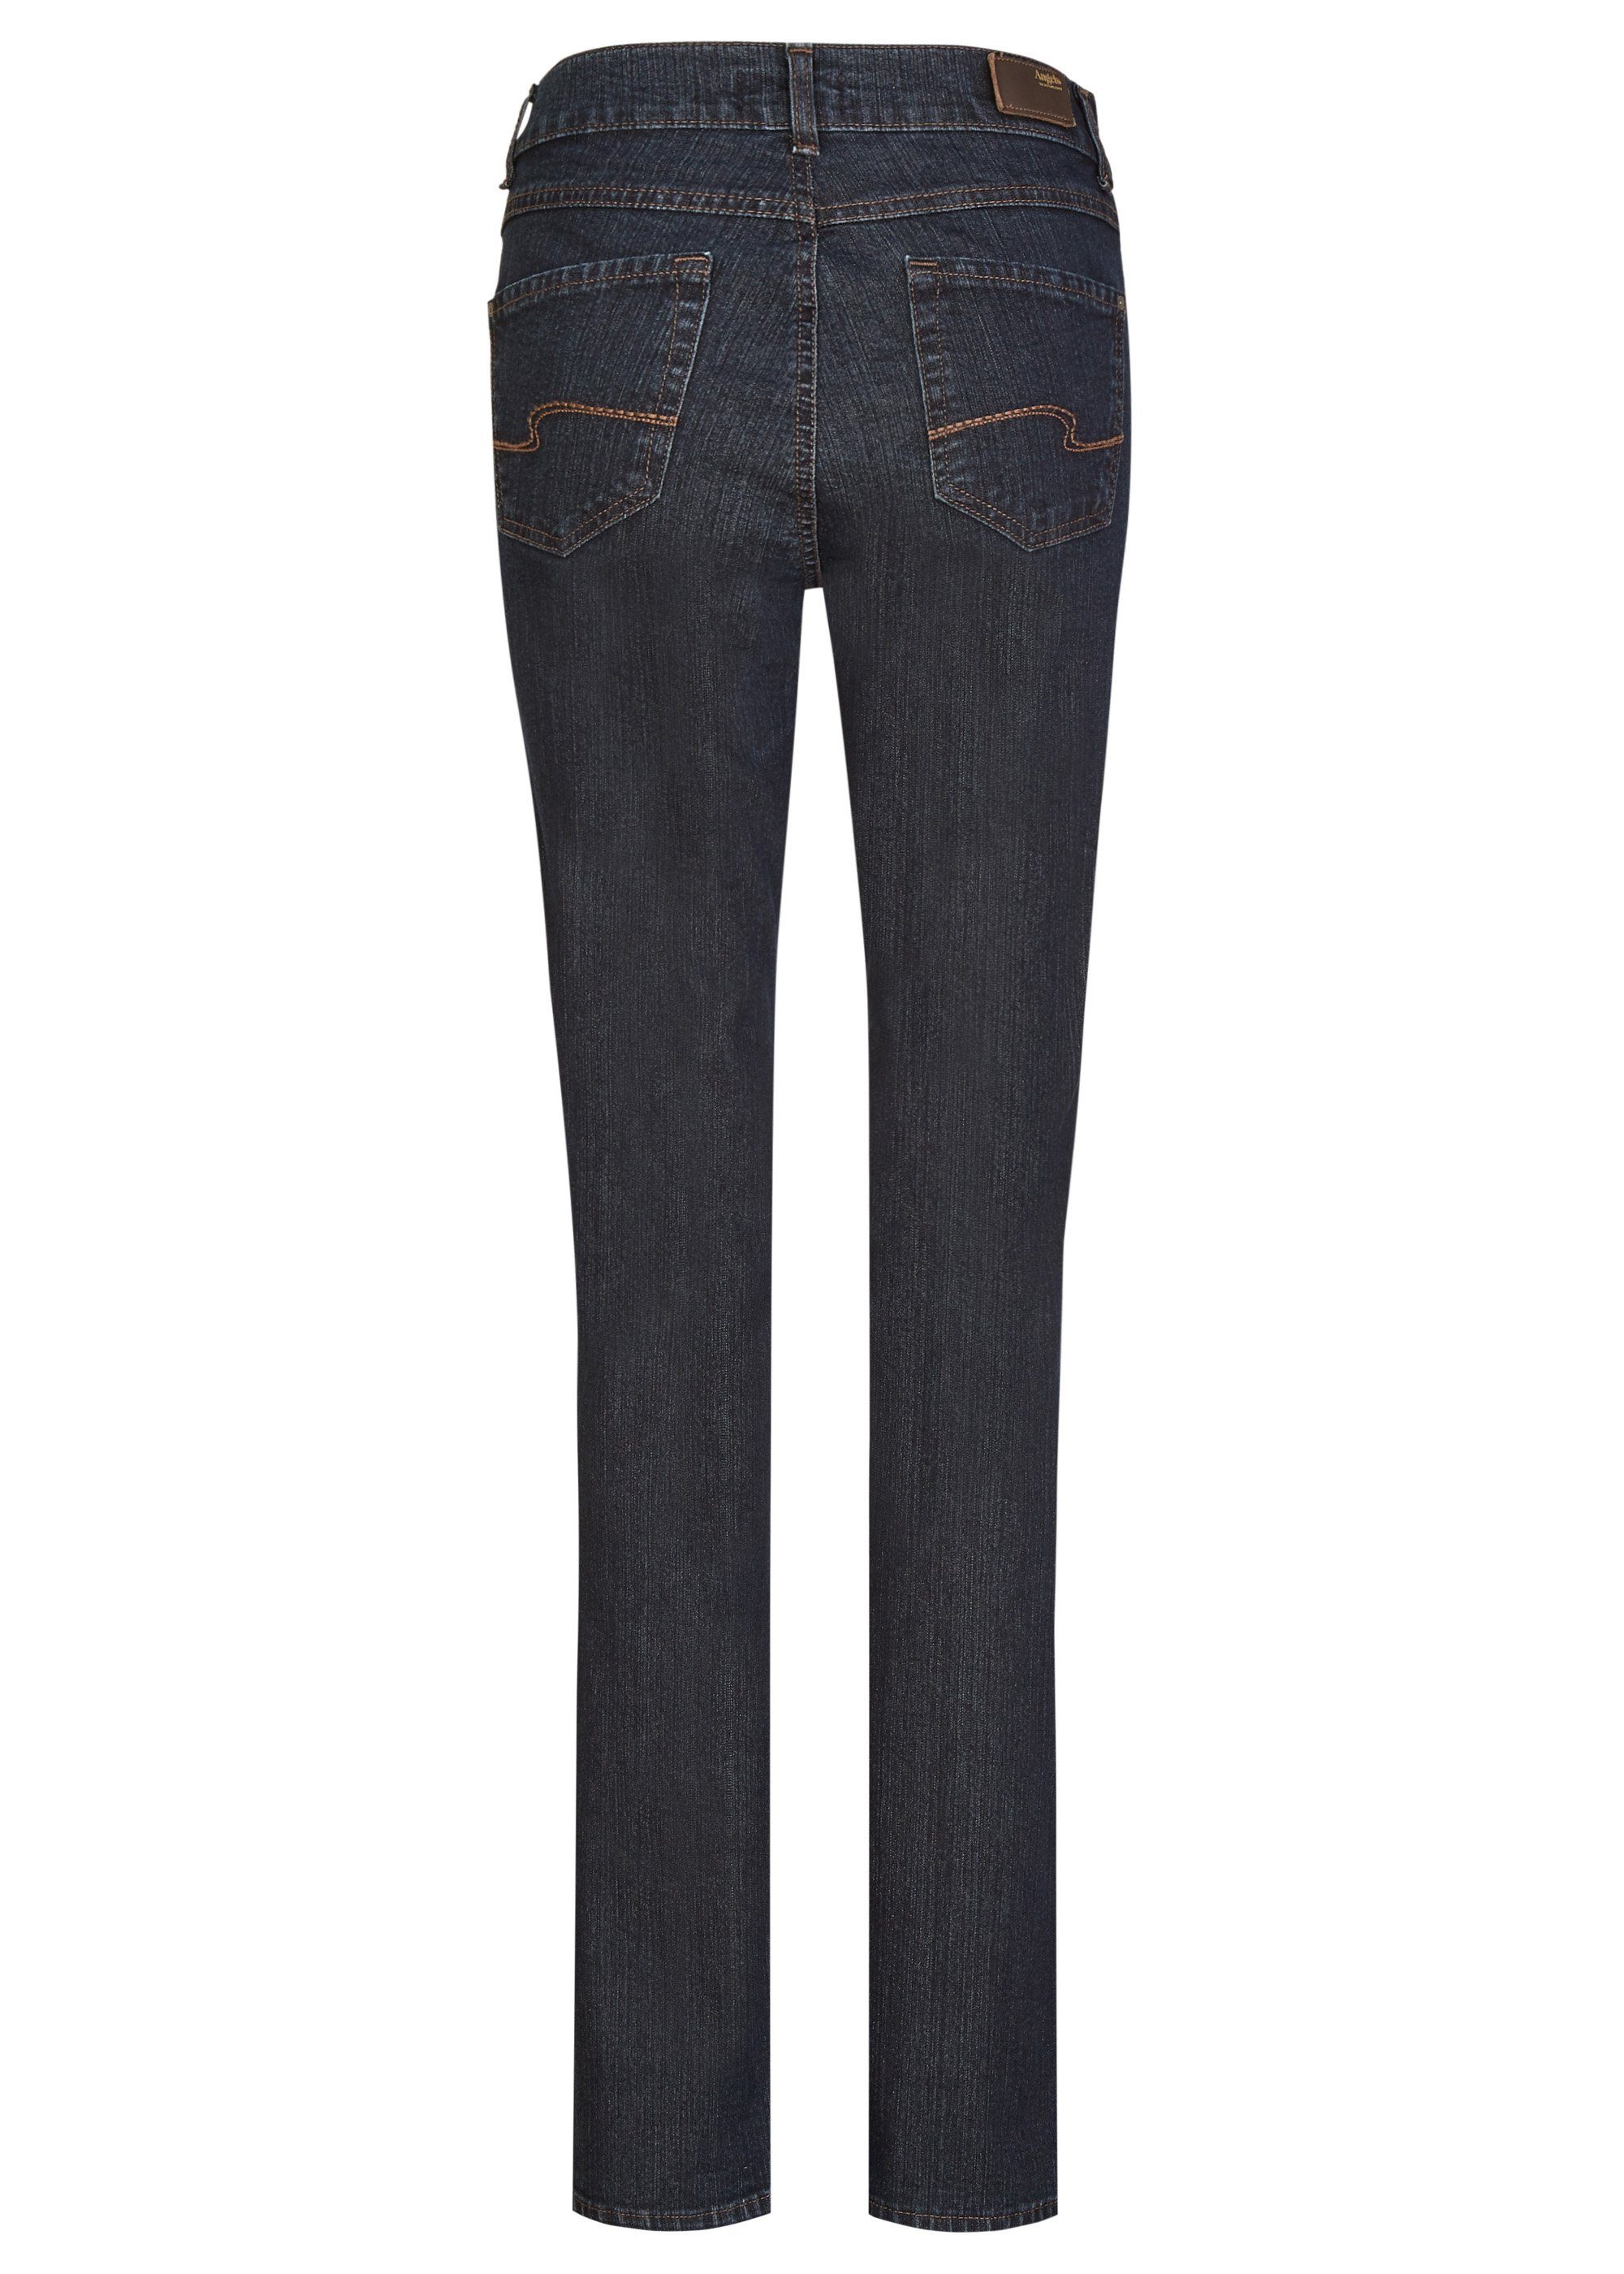 53 JEANS LUCI 90.30 blue Stretch-Jeans ANGELS ANGELS night